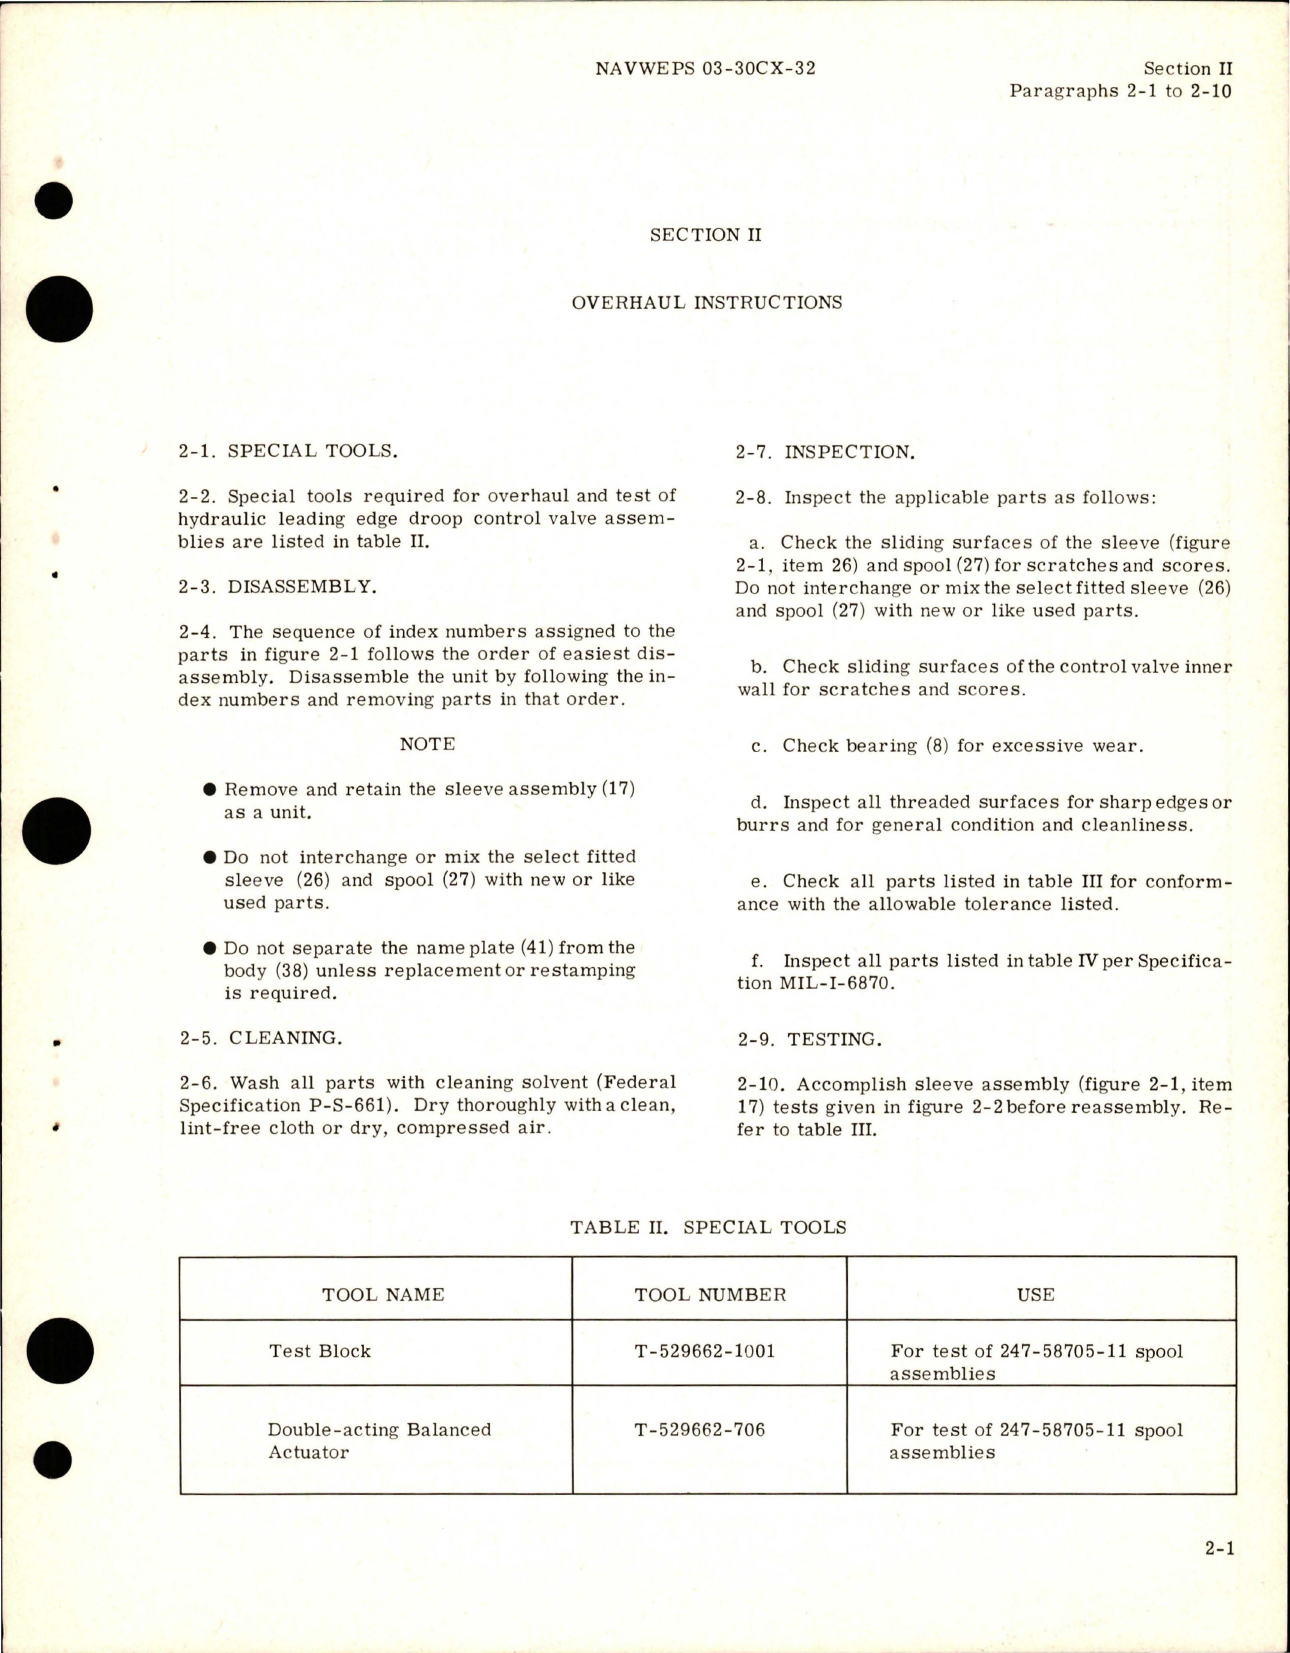 Sample page 5 from AirCorps Library document: Overhaul Instructions for Hydraulic Leading Edge Droop Control Valve Assembly